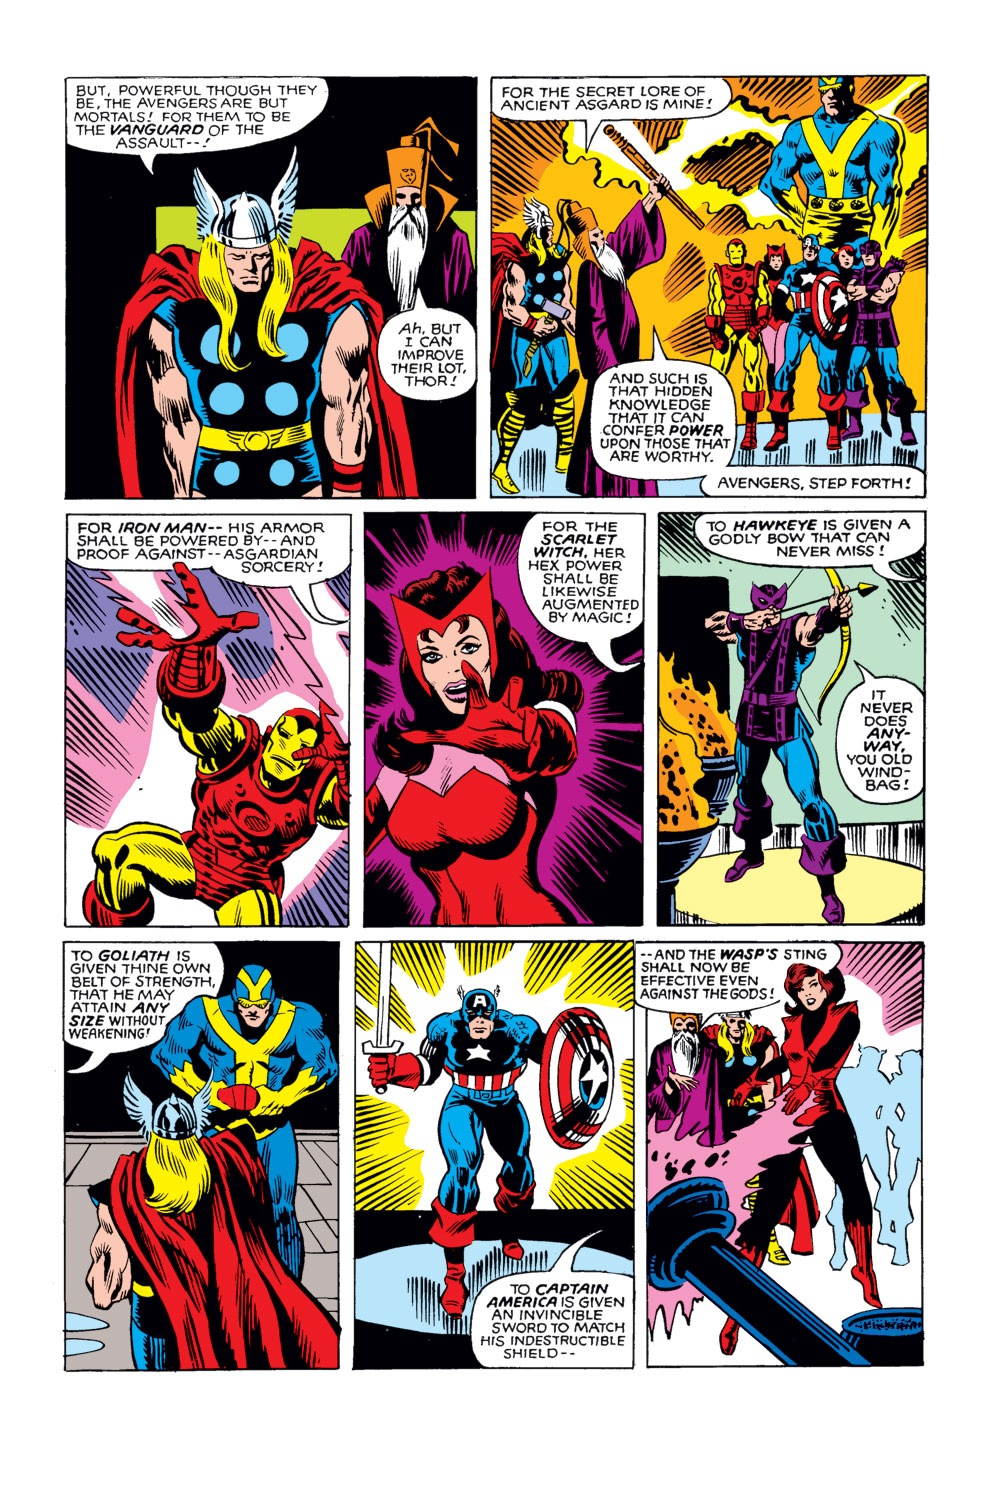 What If? (1977) issue 25 - Thor and the Avengers battled the gods - Page 13